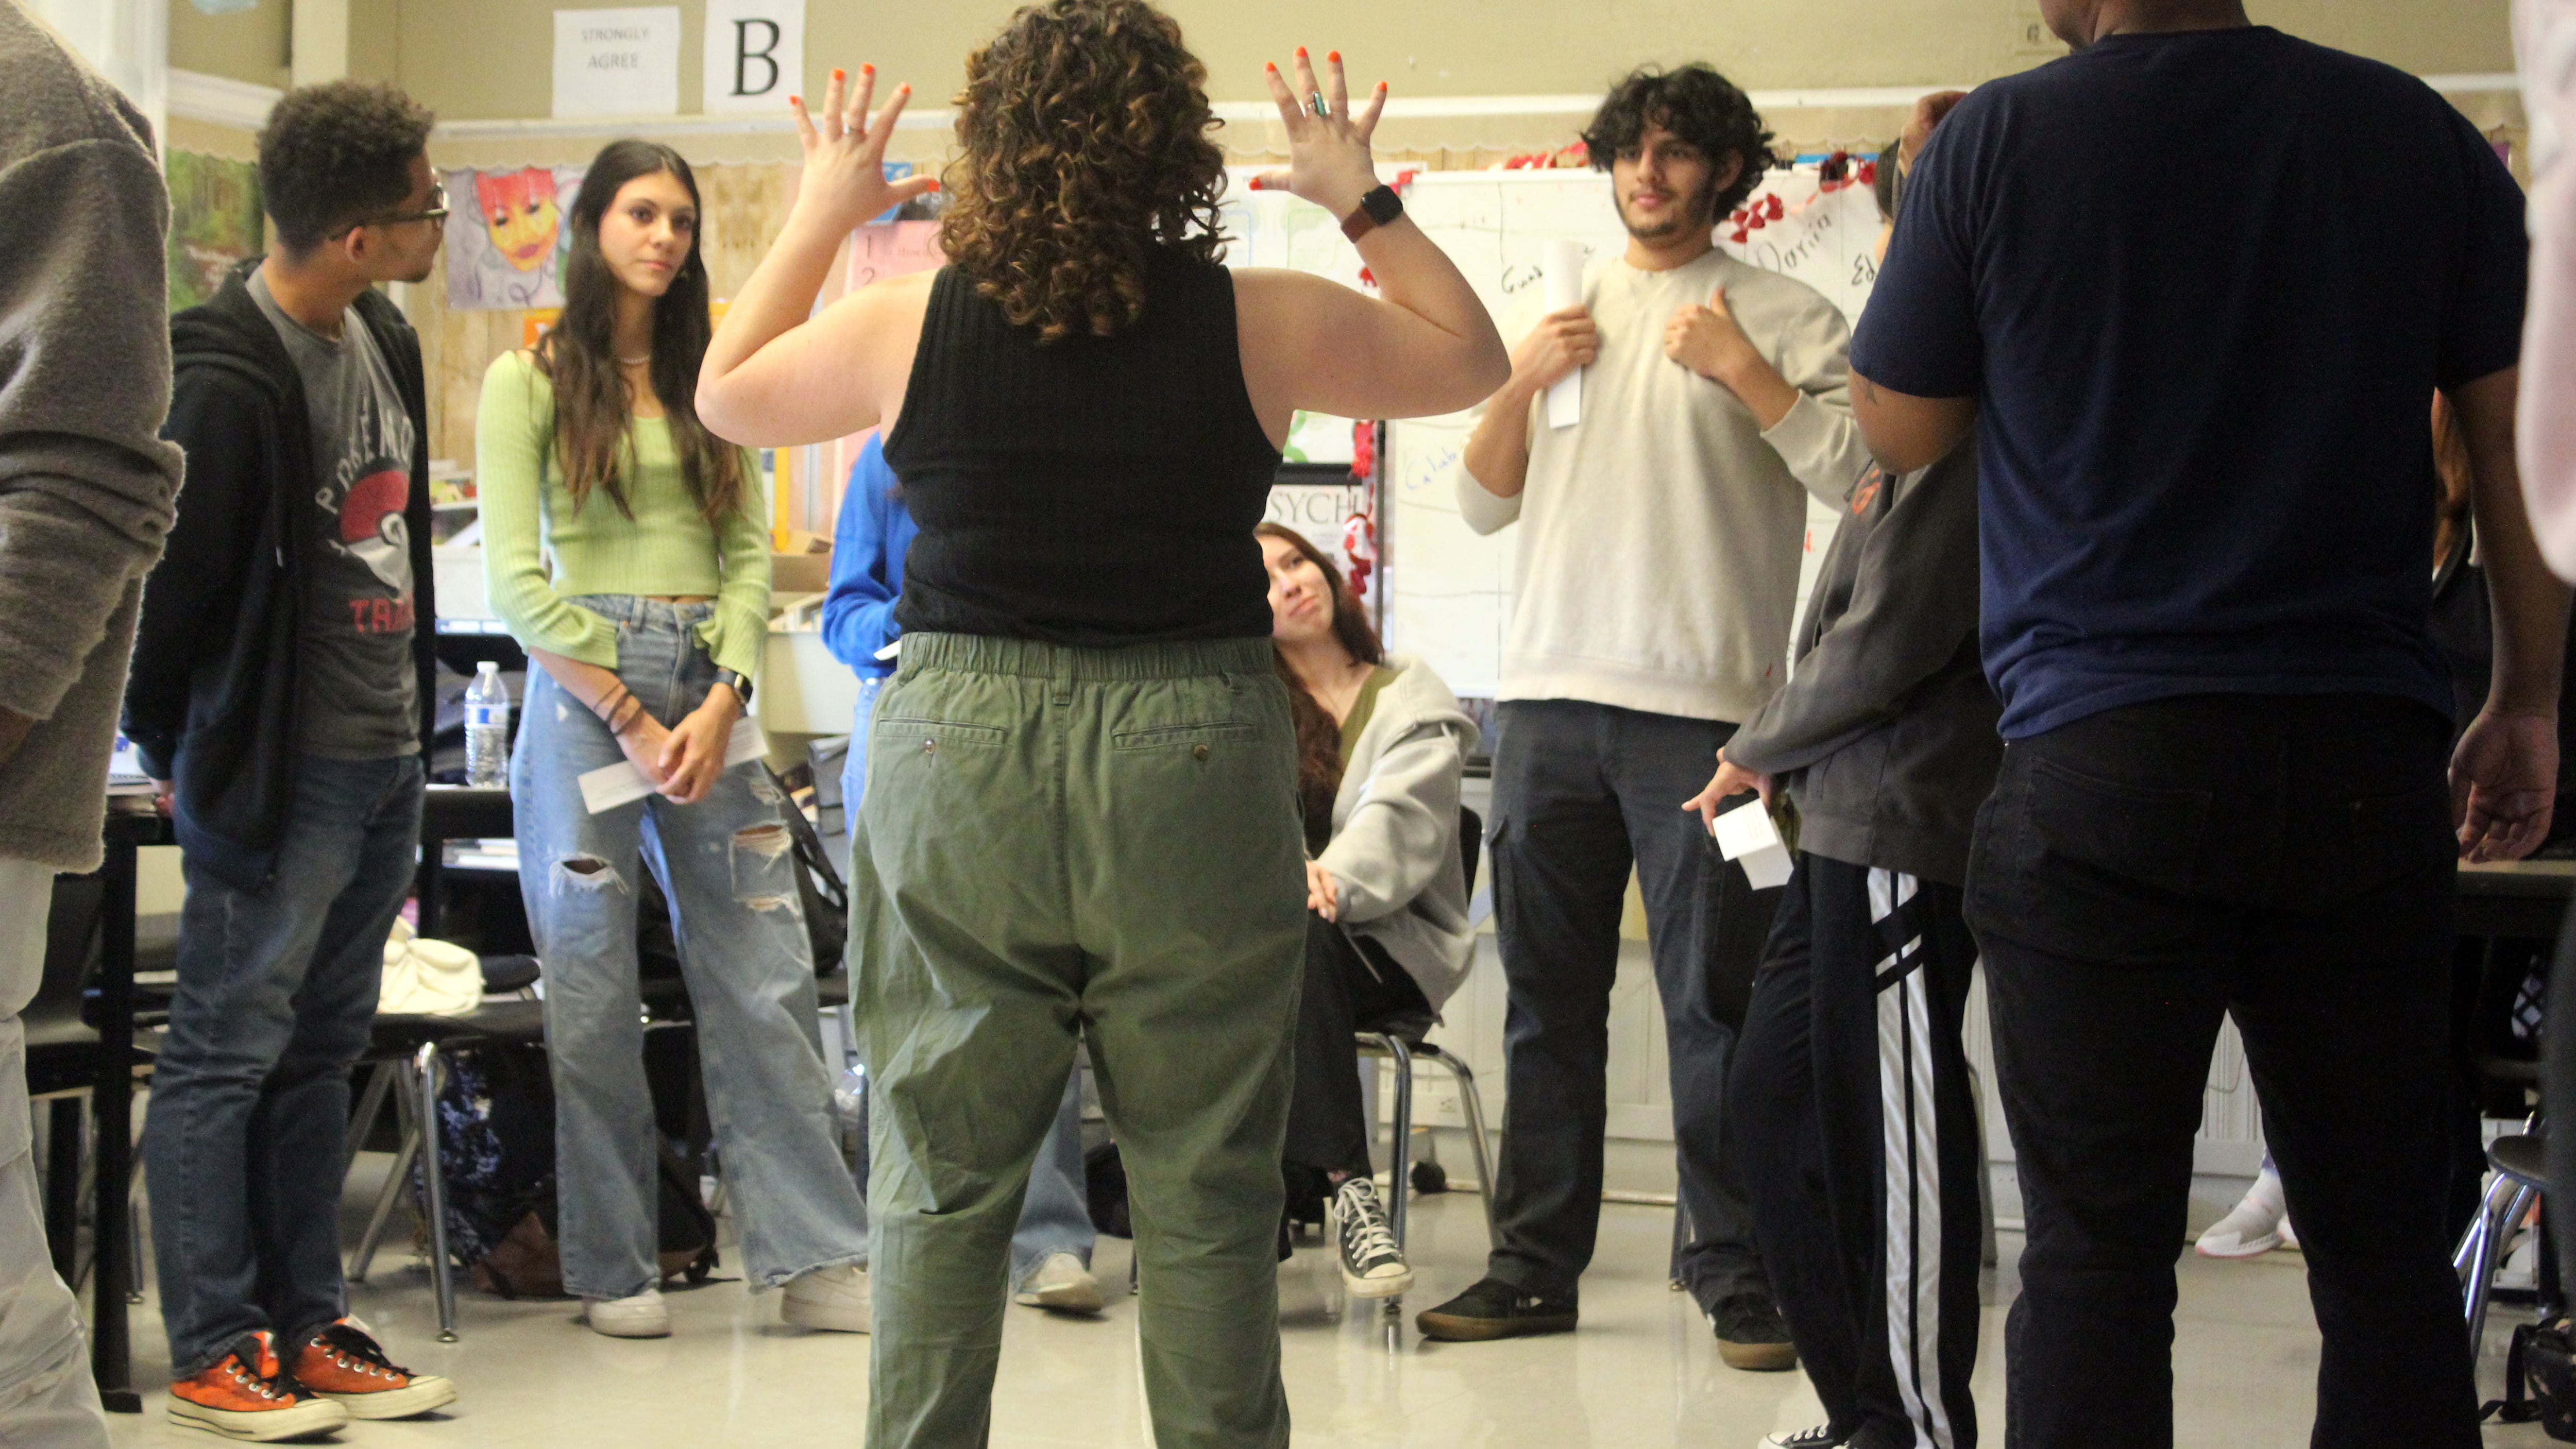 An adult holds her hands up in front of a group of high school students standing in a classroom.